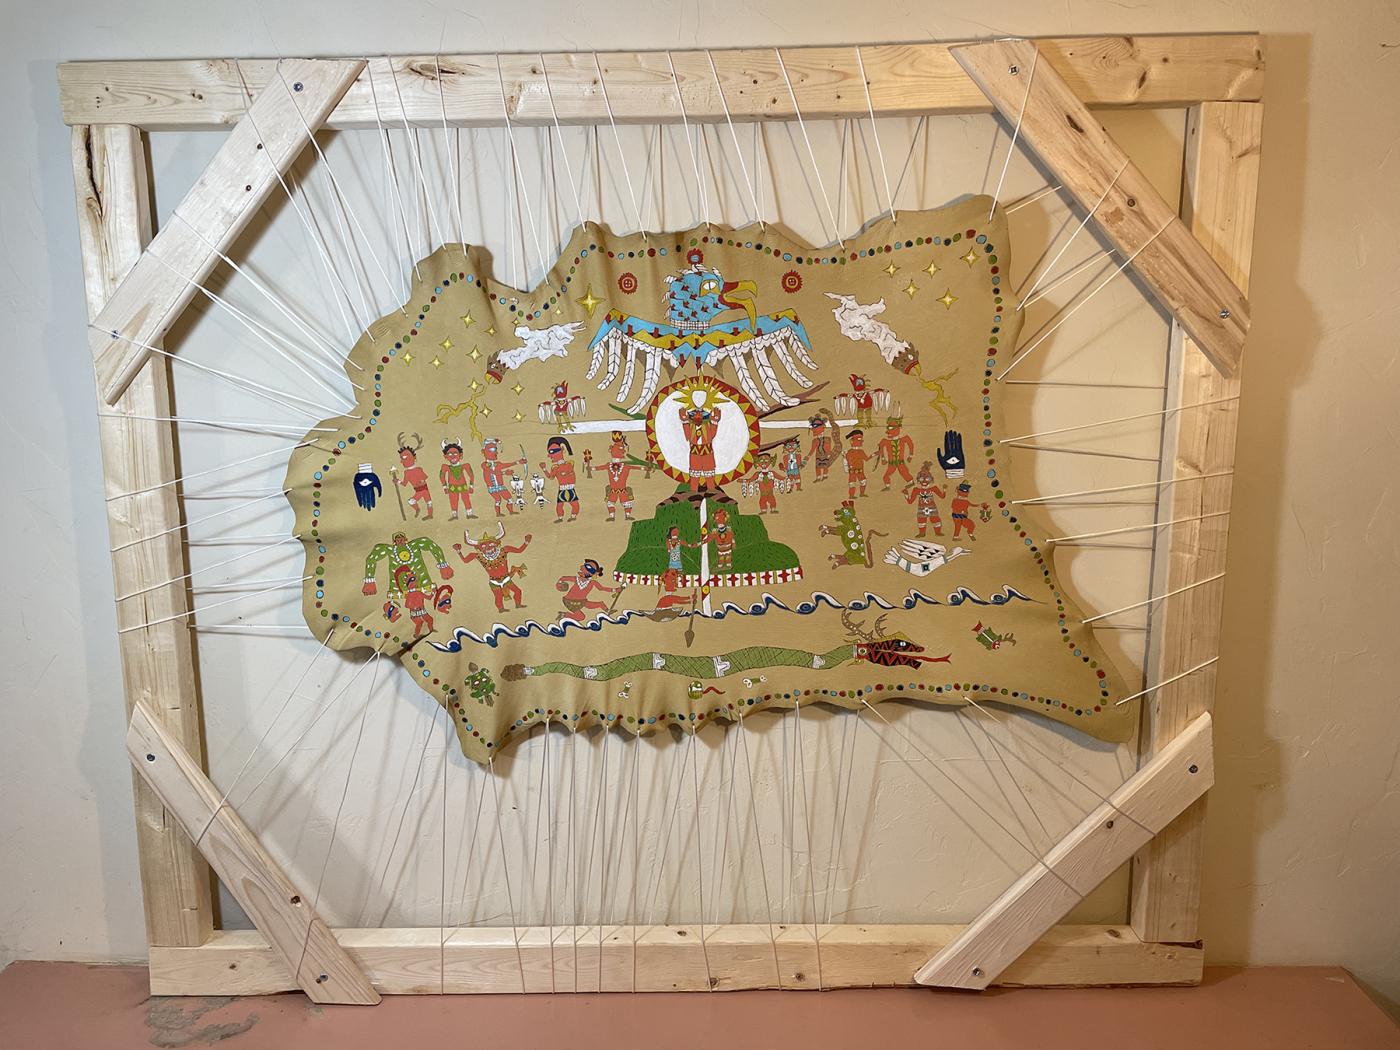 Hide stretched in a frame painted with thunderbird iconography in the upper segment, separating human and animal figures in the middle segment, above a large serpent in the lower segment.